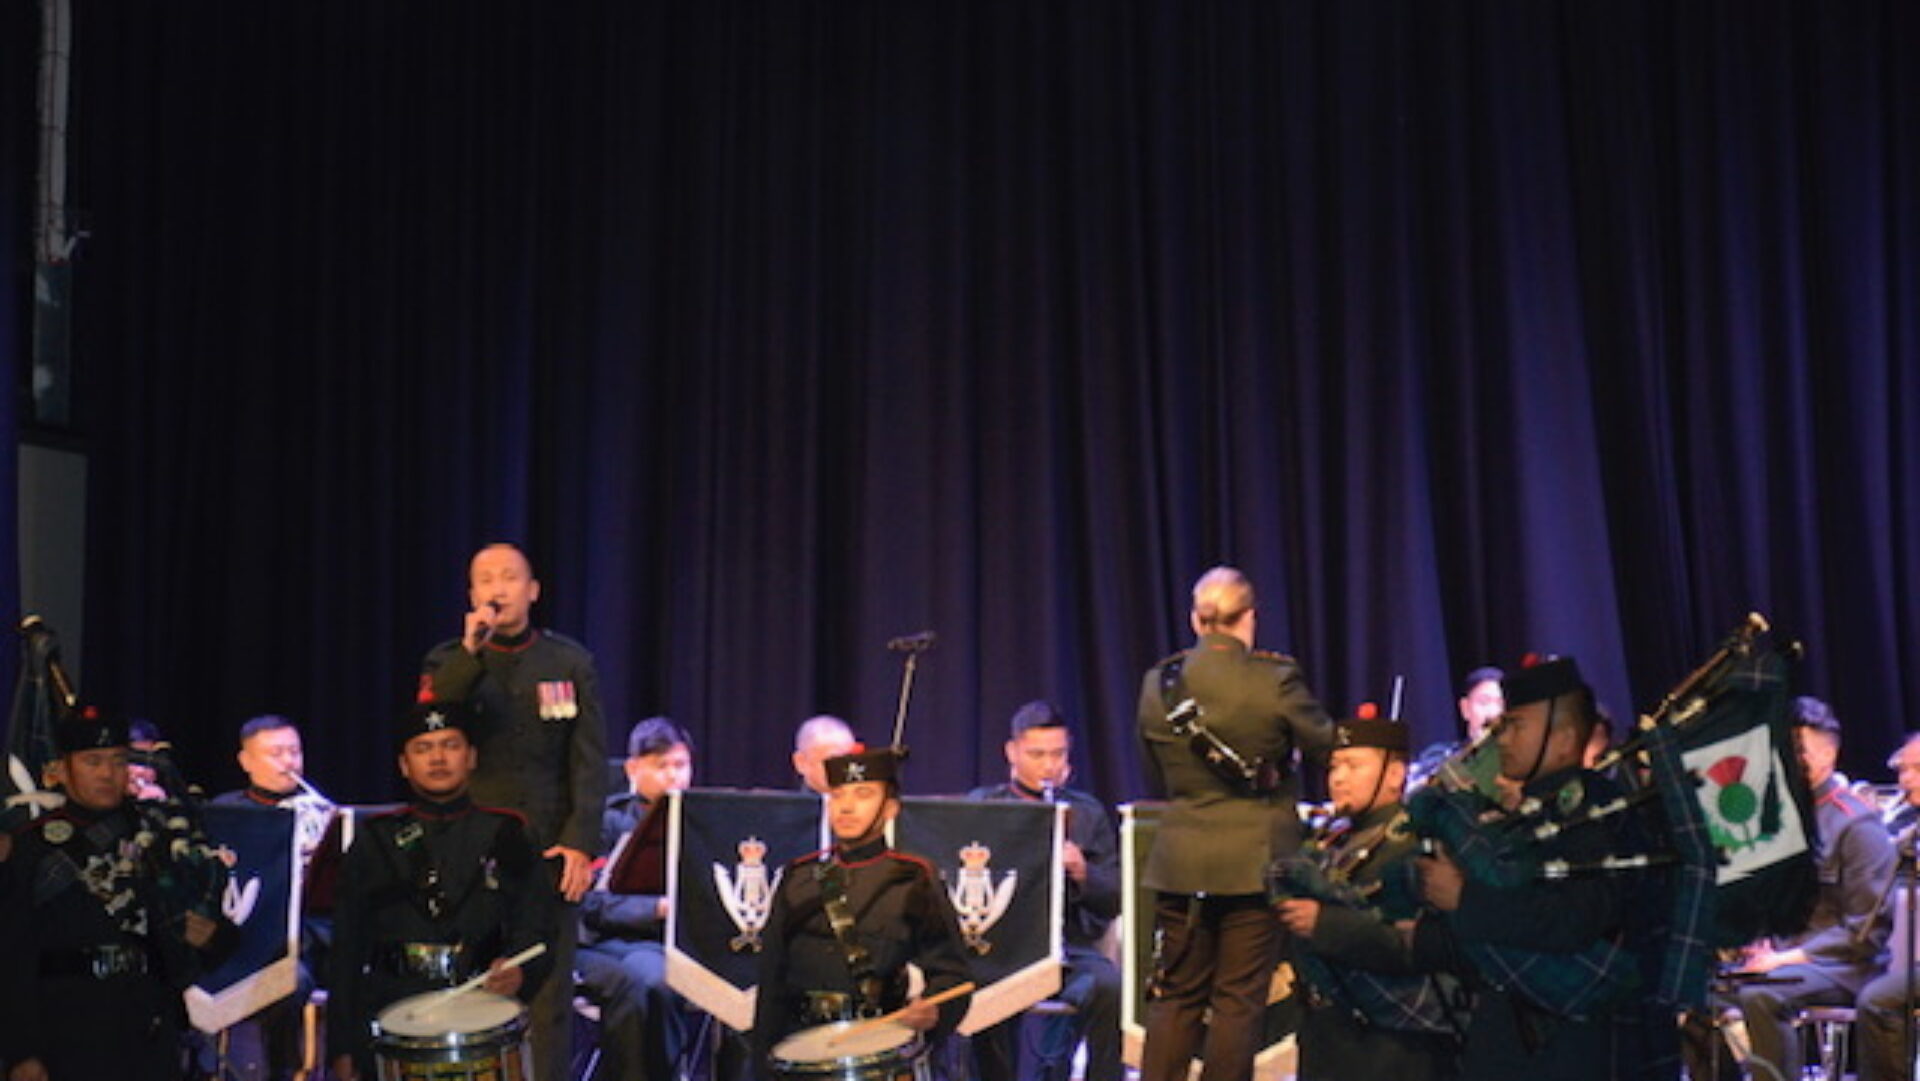 The Band of the Brigade of Gurkhas Yorkshire Concert